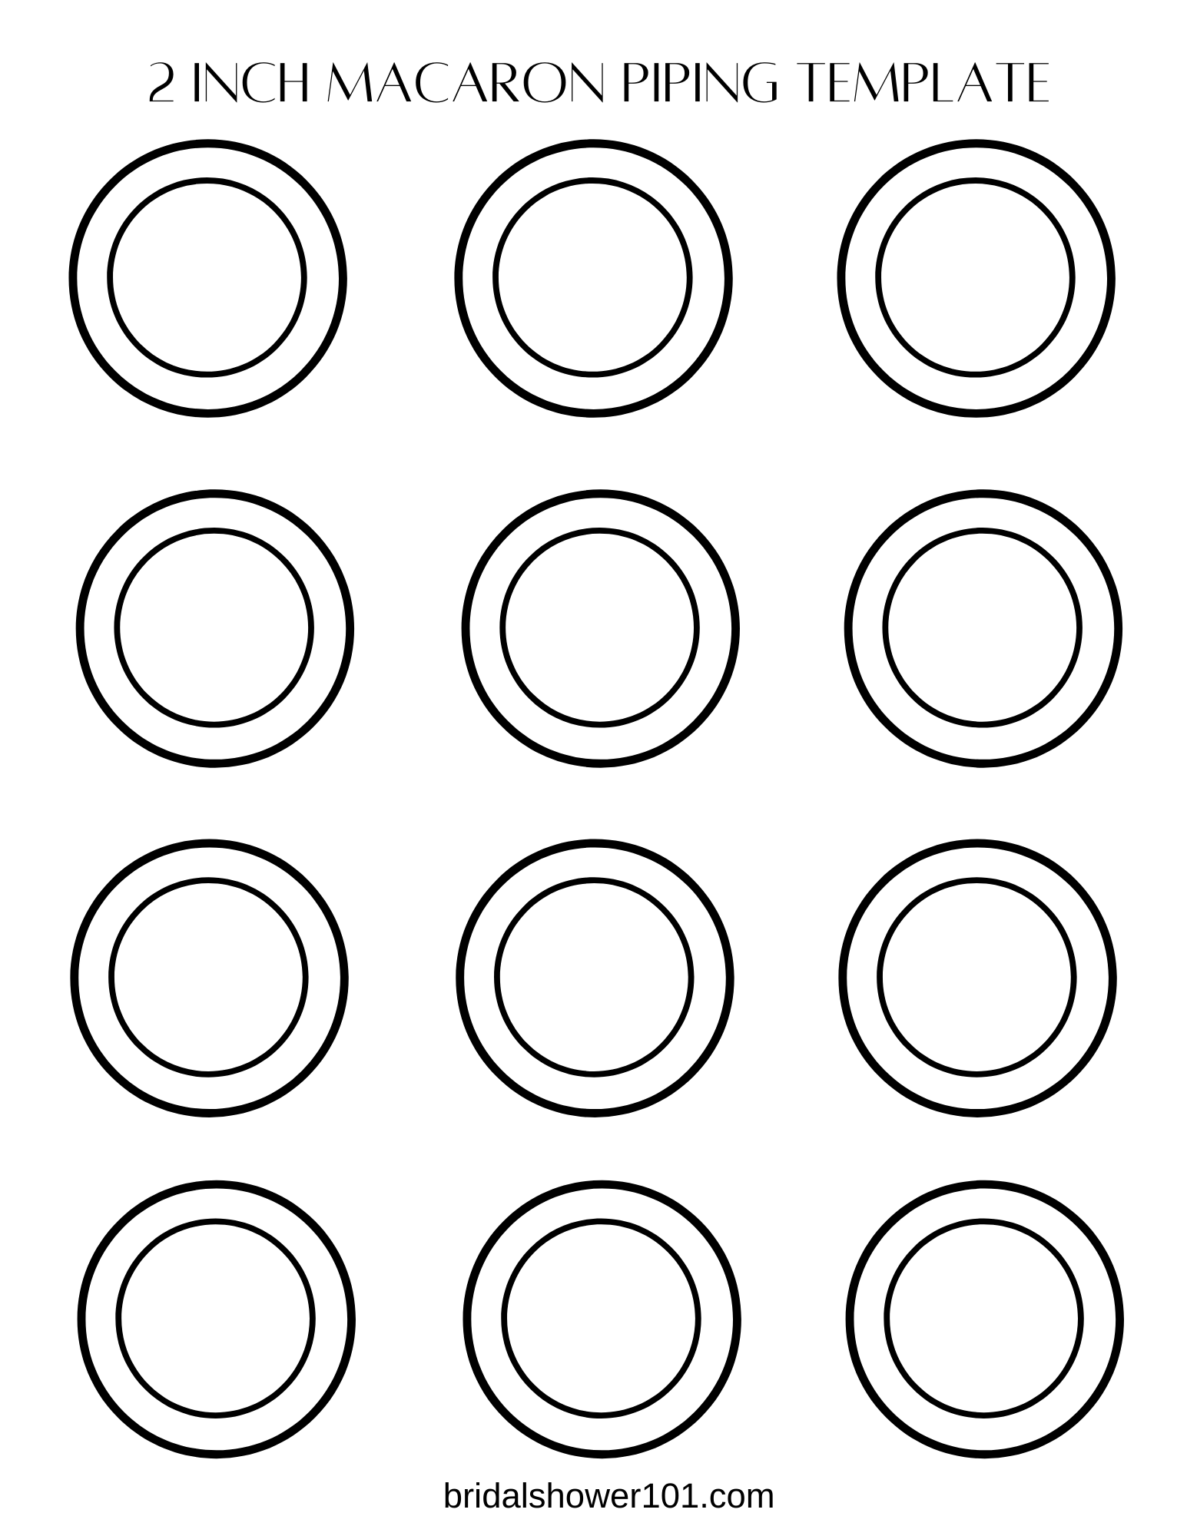 Free Printable Macaron Template And Piping Outline (PDF) | Bridal ...